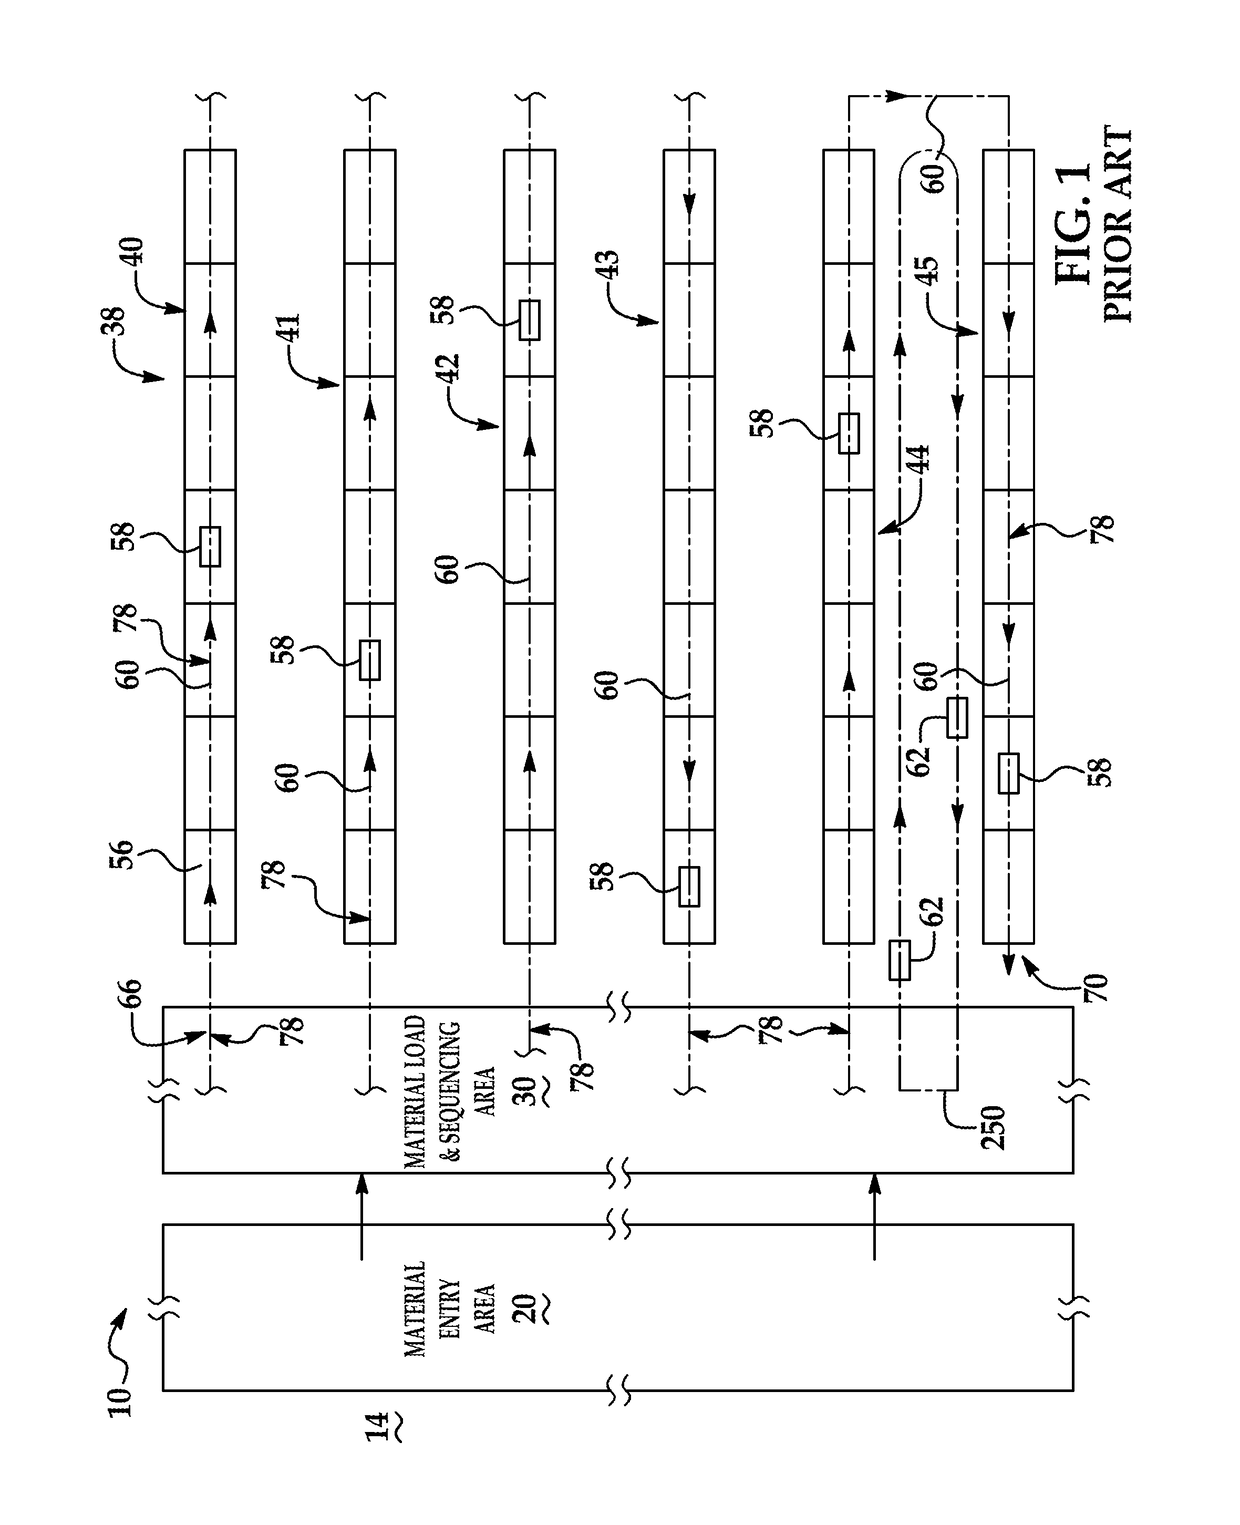 Modular vehicle assembly system and method